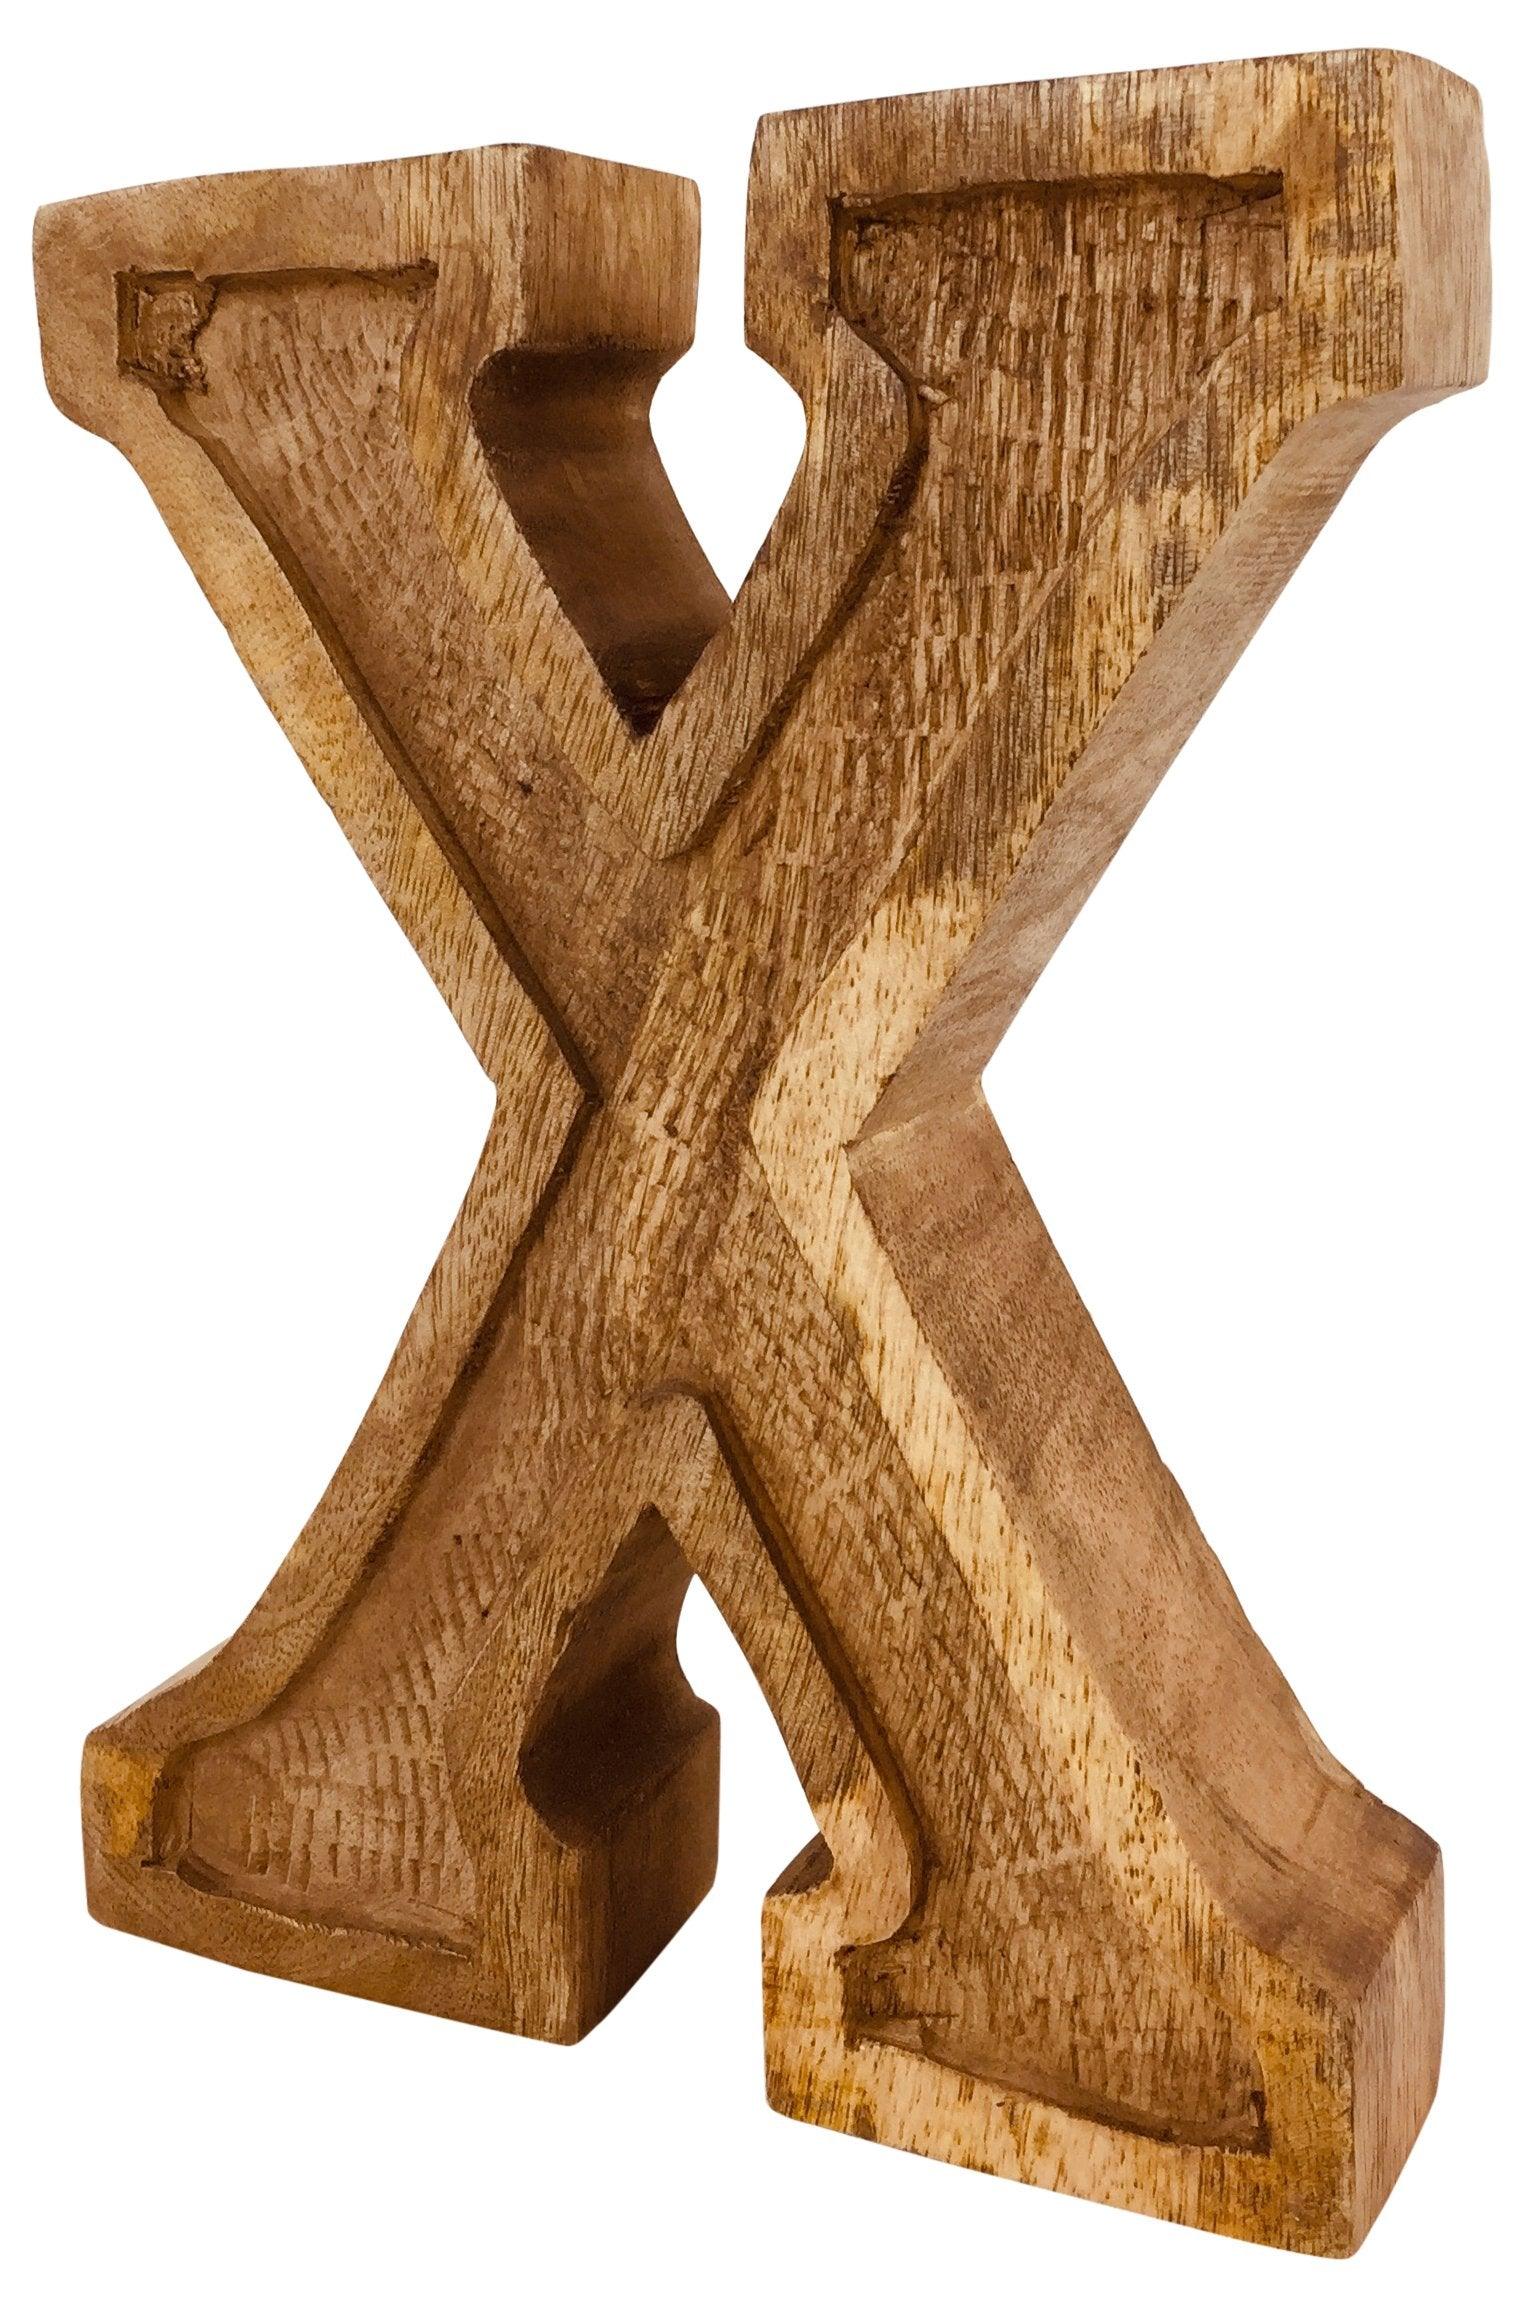 View Hand Carved Wooden Embossed Letter X information